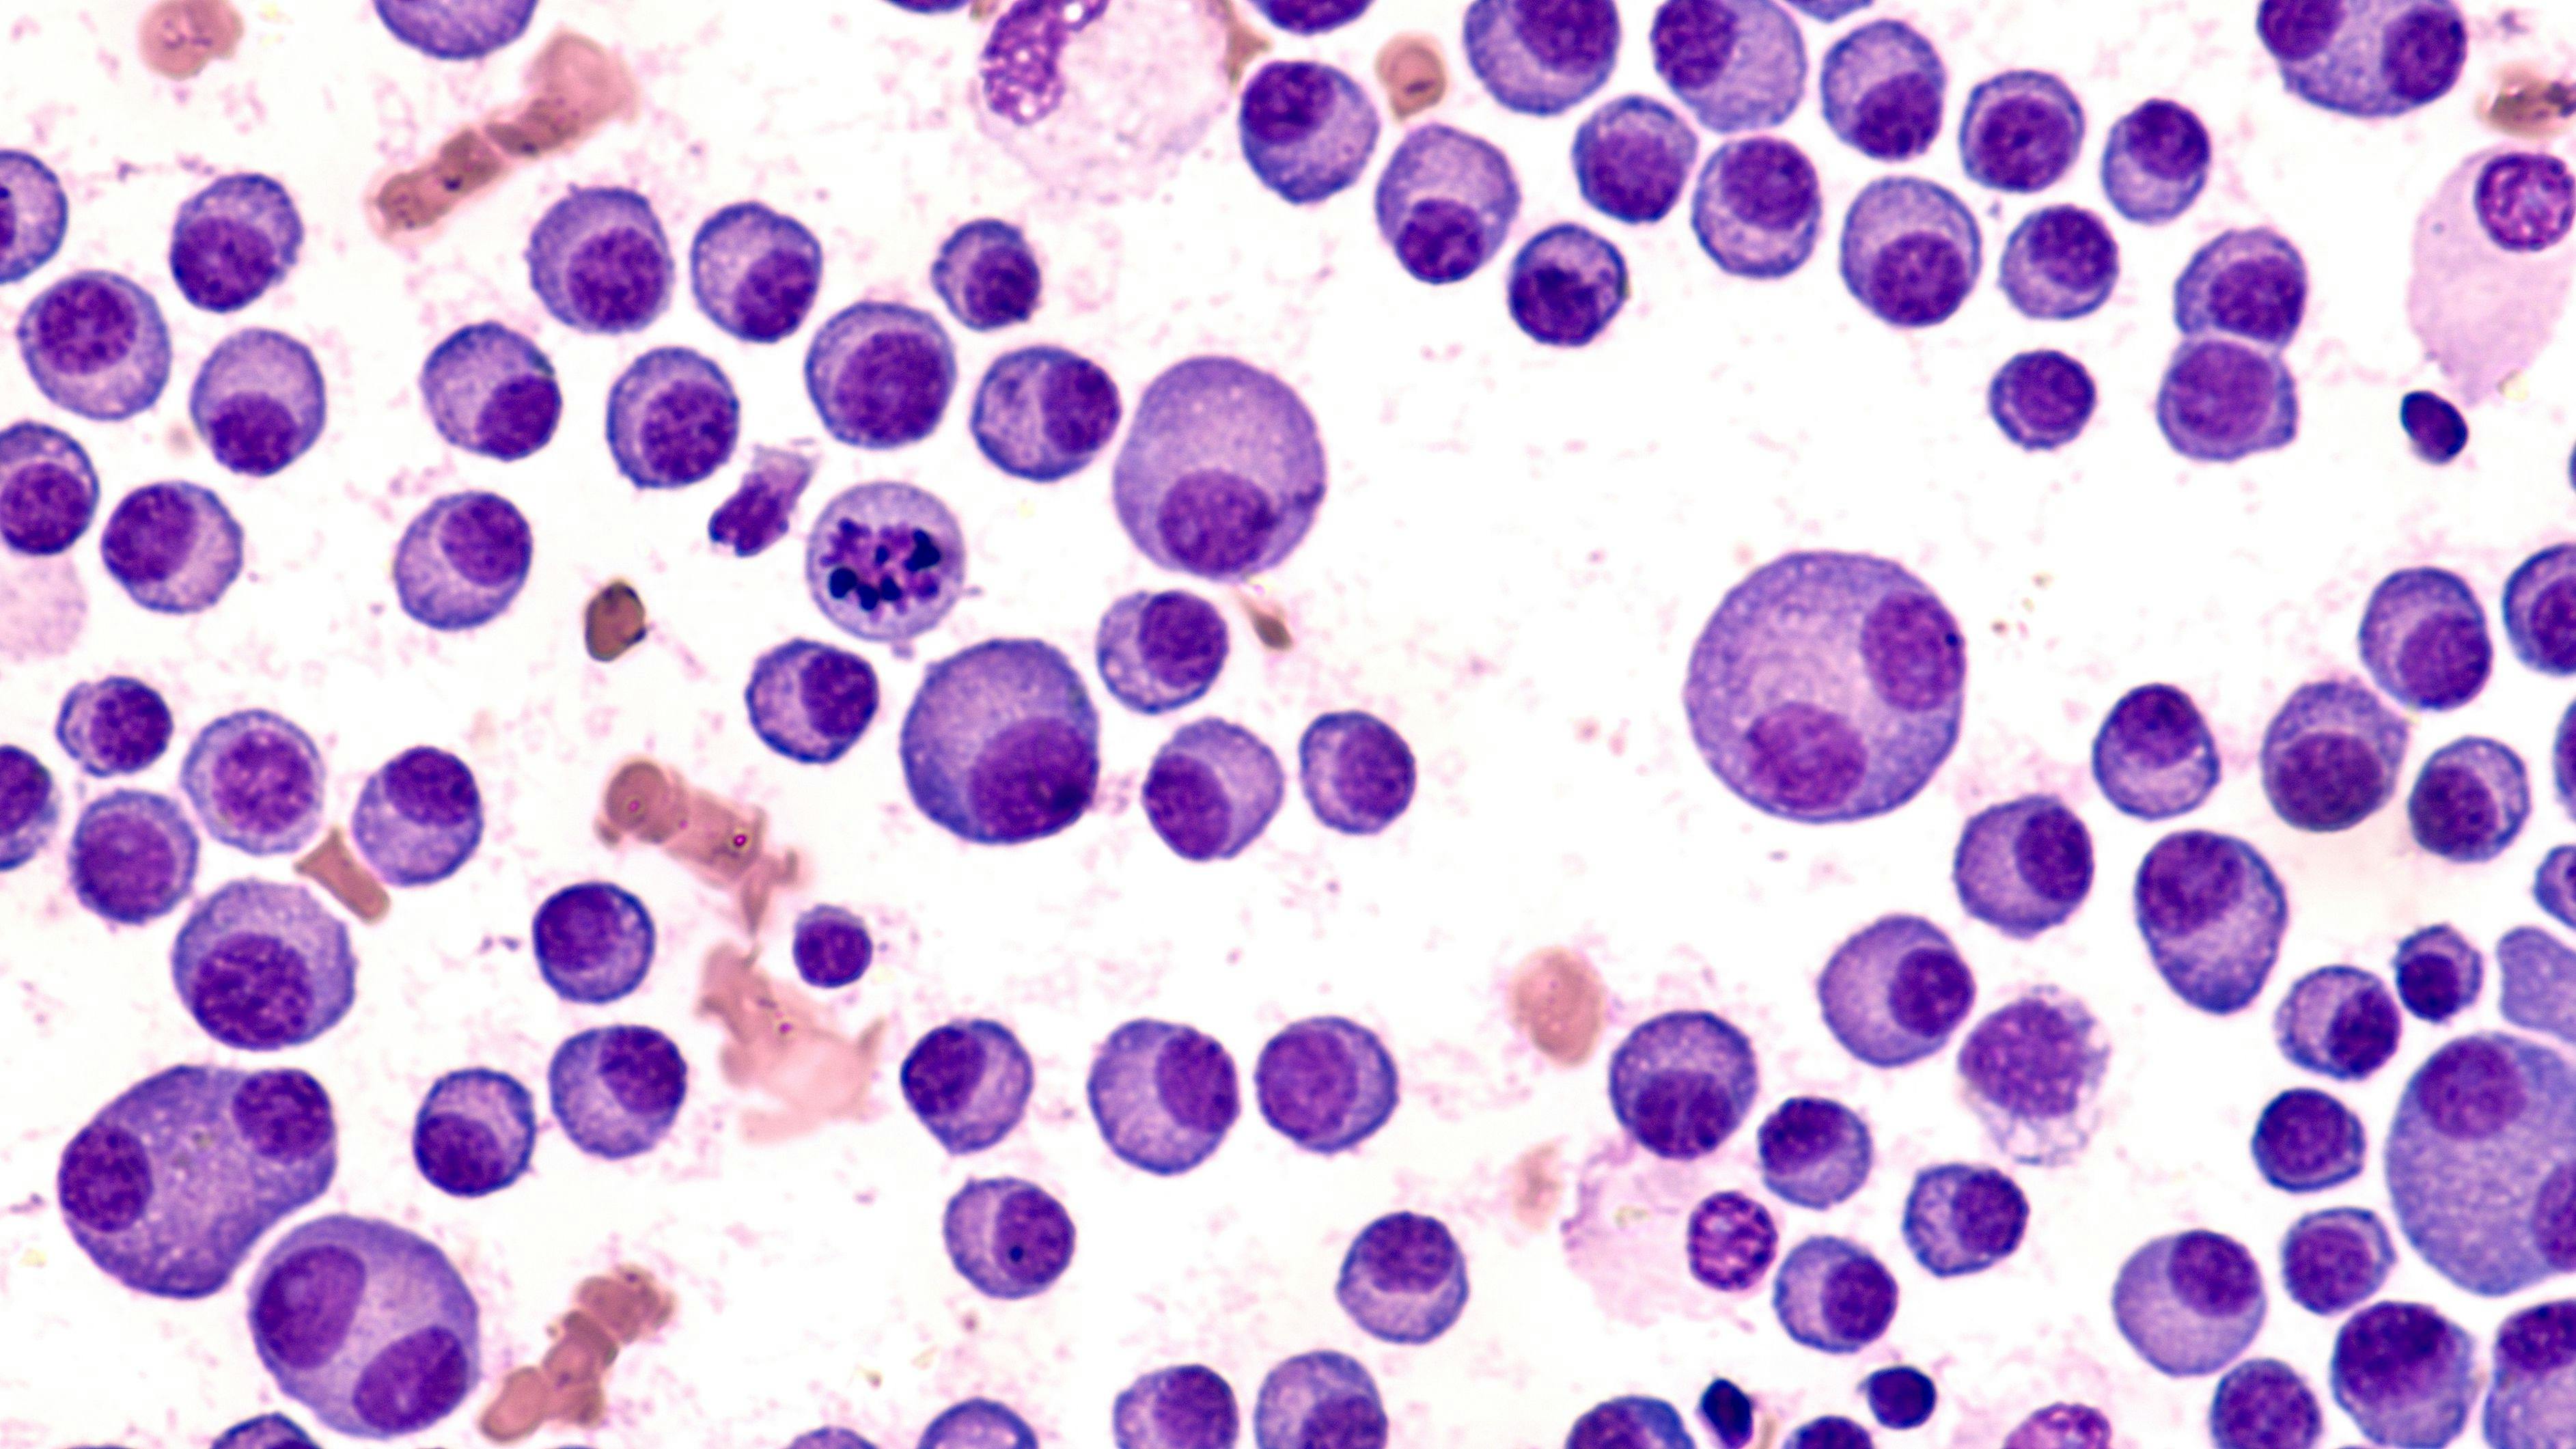 Multiple Myeloma Awareness: Bone marrow aspirate cytology of multiple myeloma, a type of bone marrow cancer of malignant plasma cells, associated with bone pain, bone fractures and anemia. | Image Credit: © David A Litman - stock.adobe.com